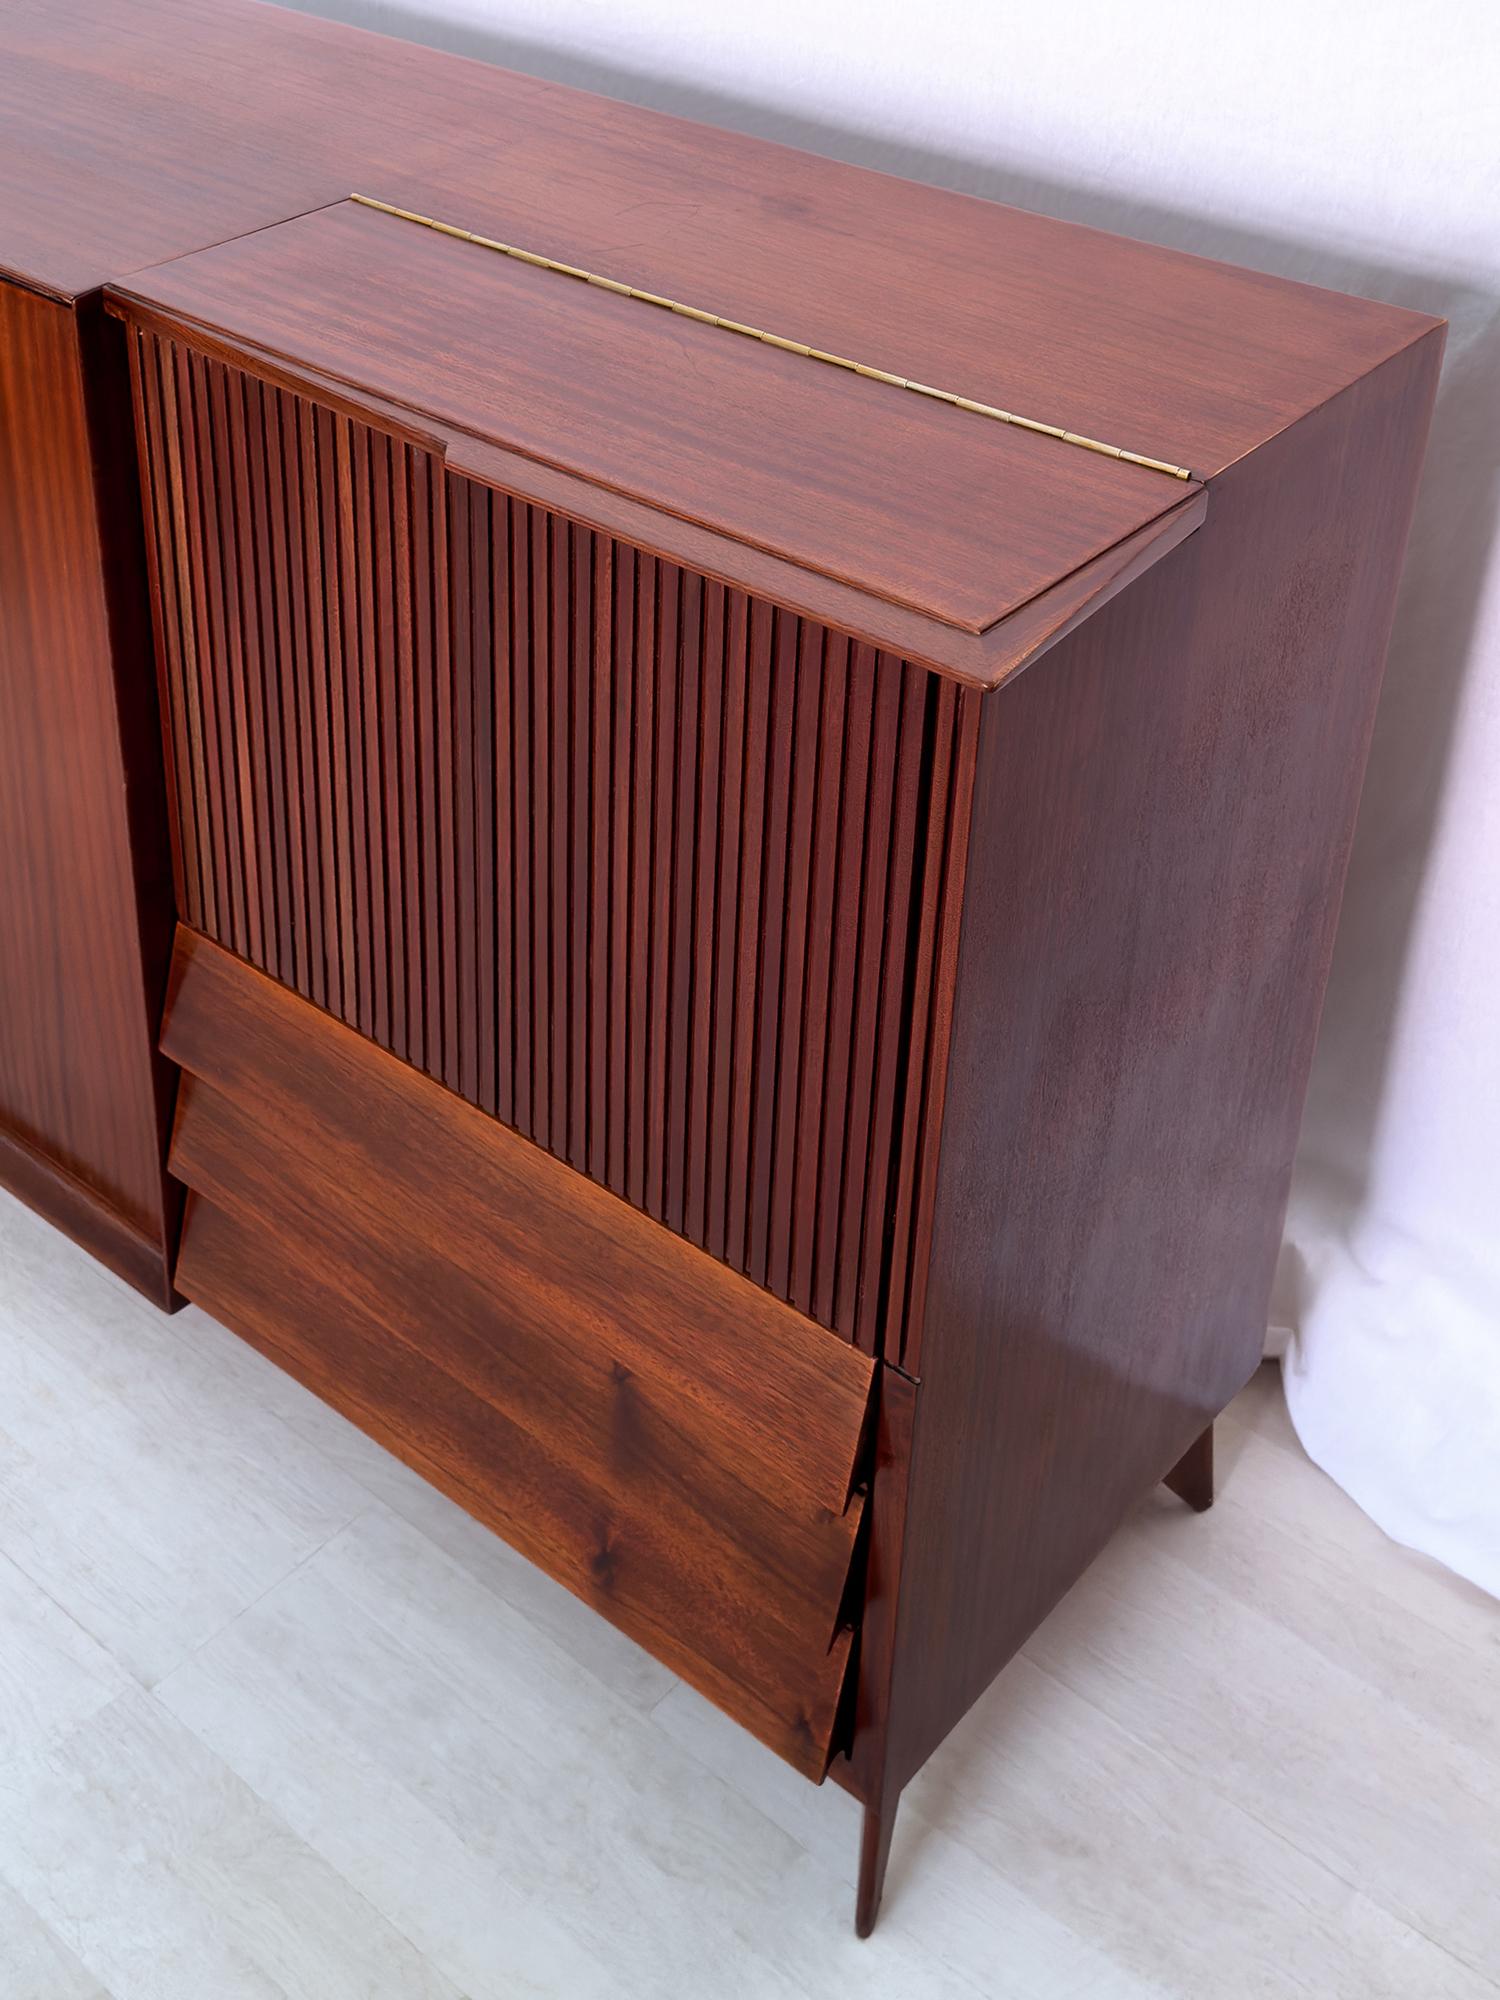 Italian Mid-Century Teak Wood Sideboard with Bar Cabinet by Vittorio Dassi, 1950s For Sale 7